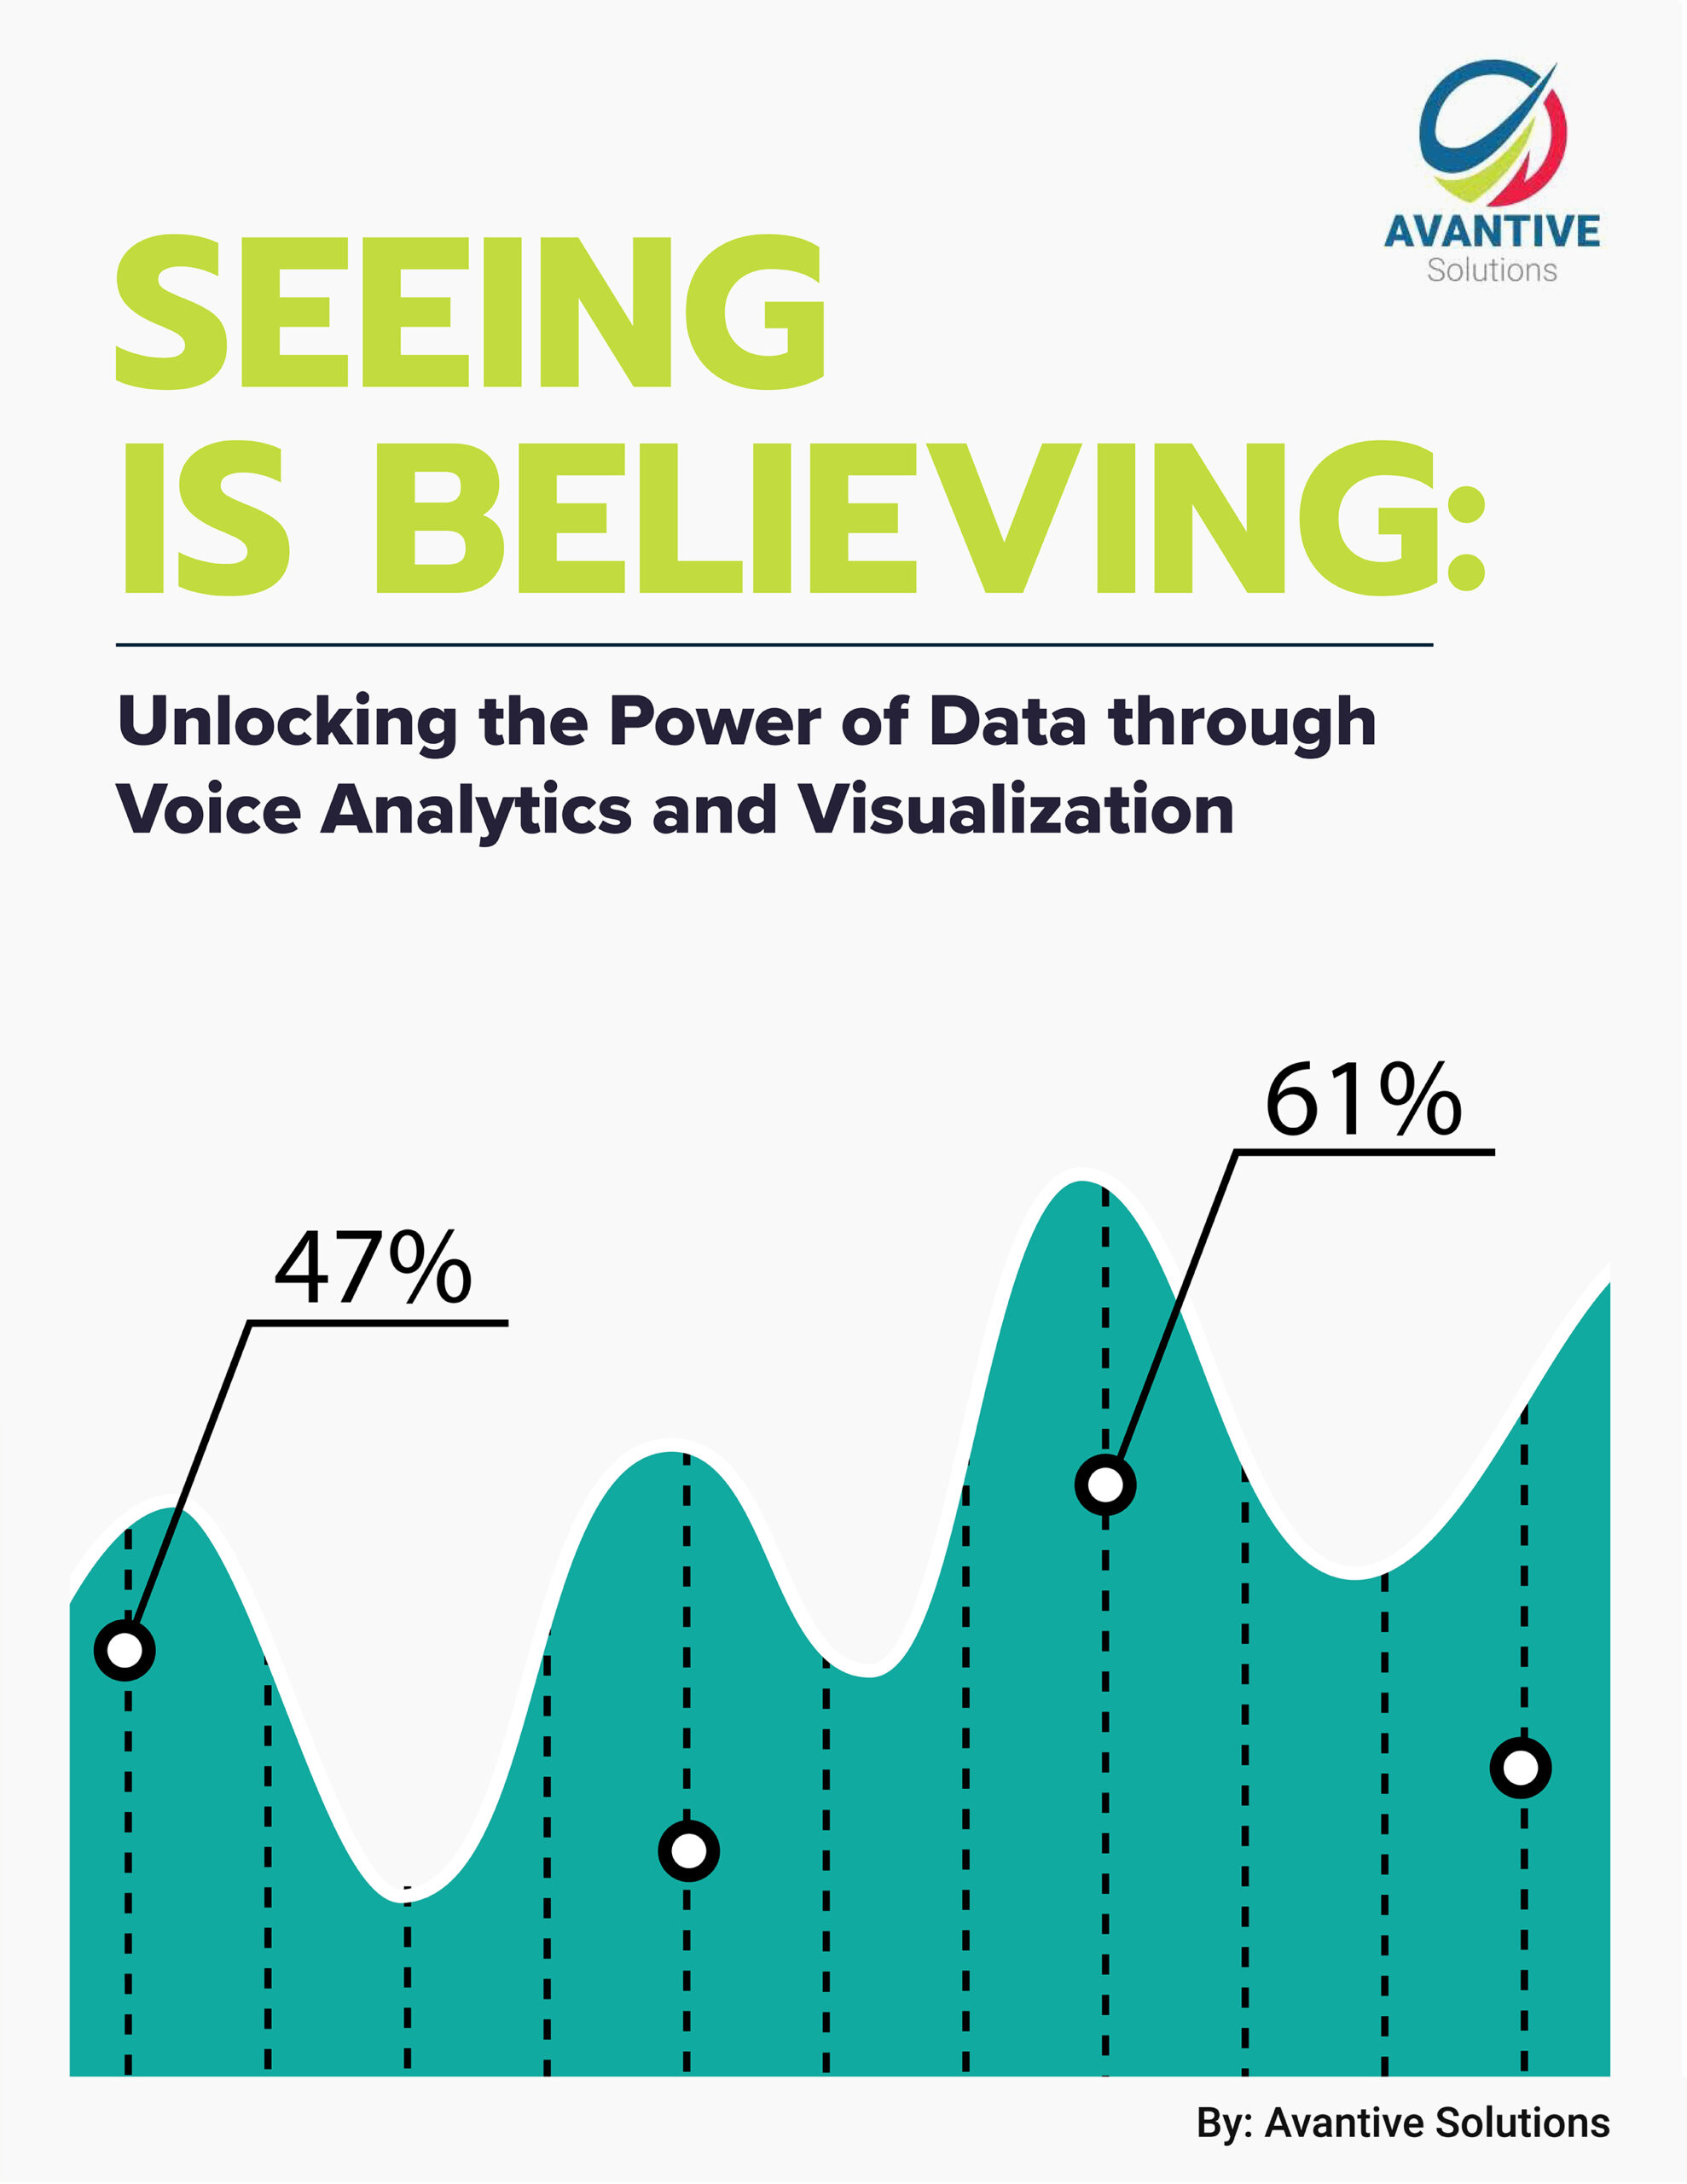 Seeing is Believing: Unlocking the Power of Data through Voice Analytics and Visualization